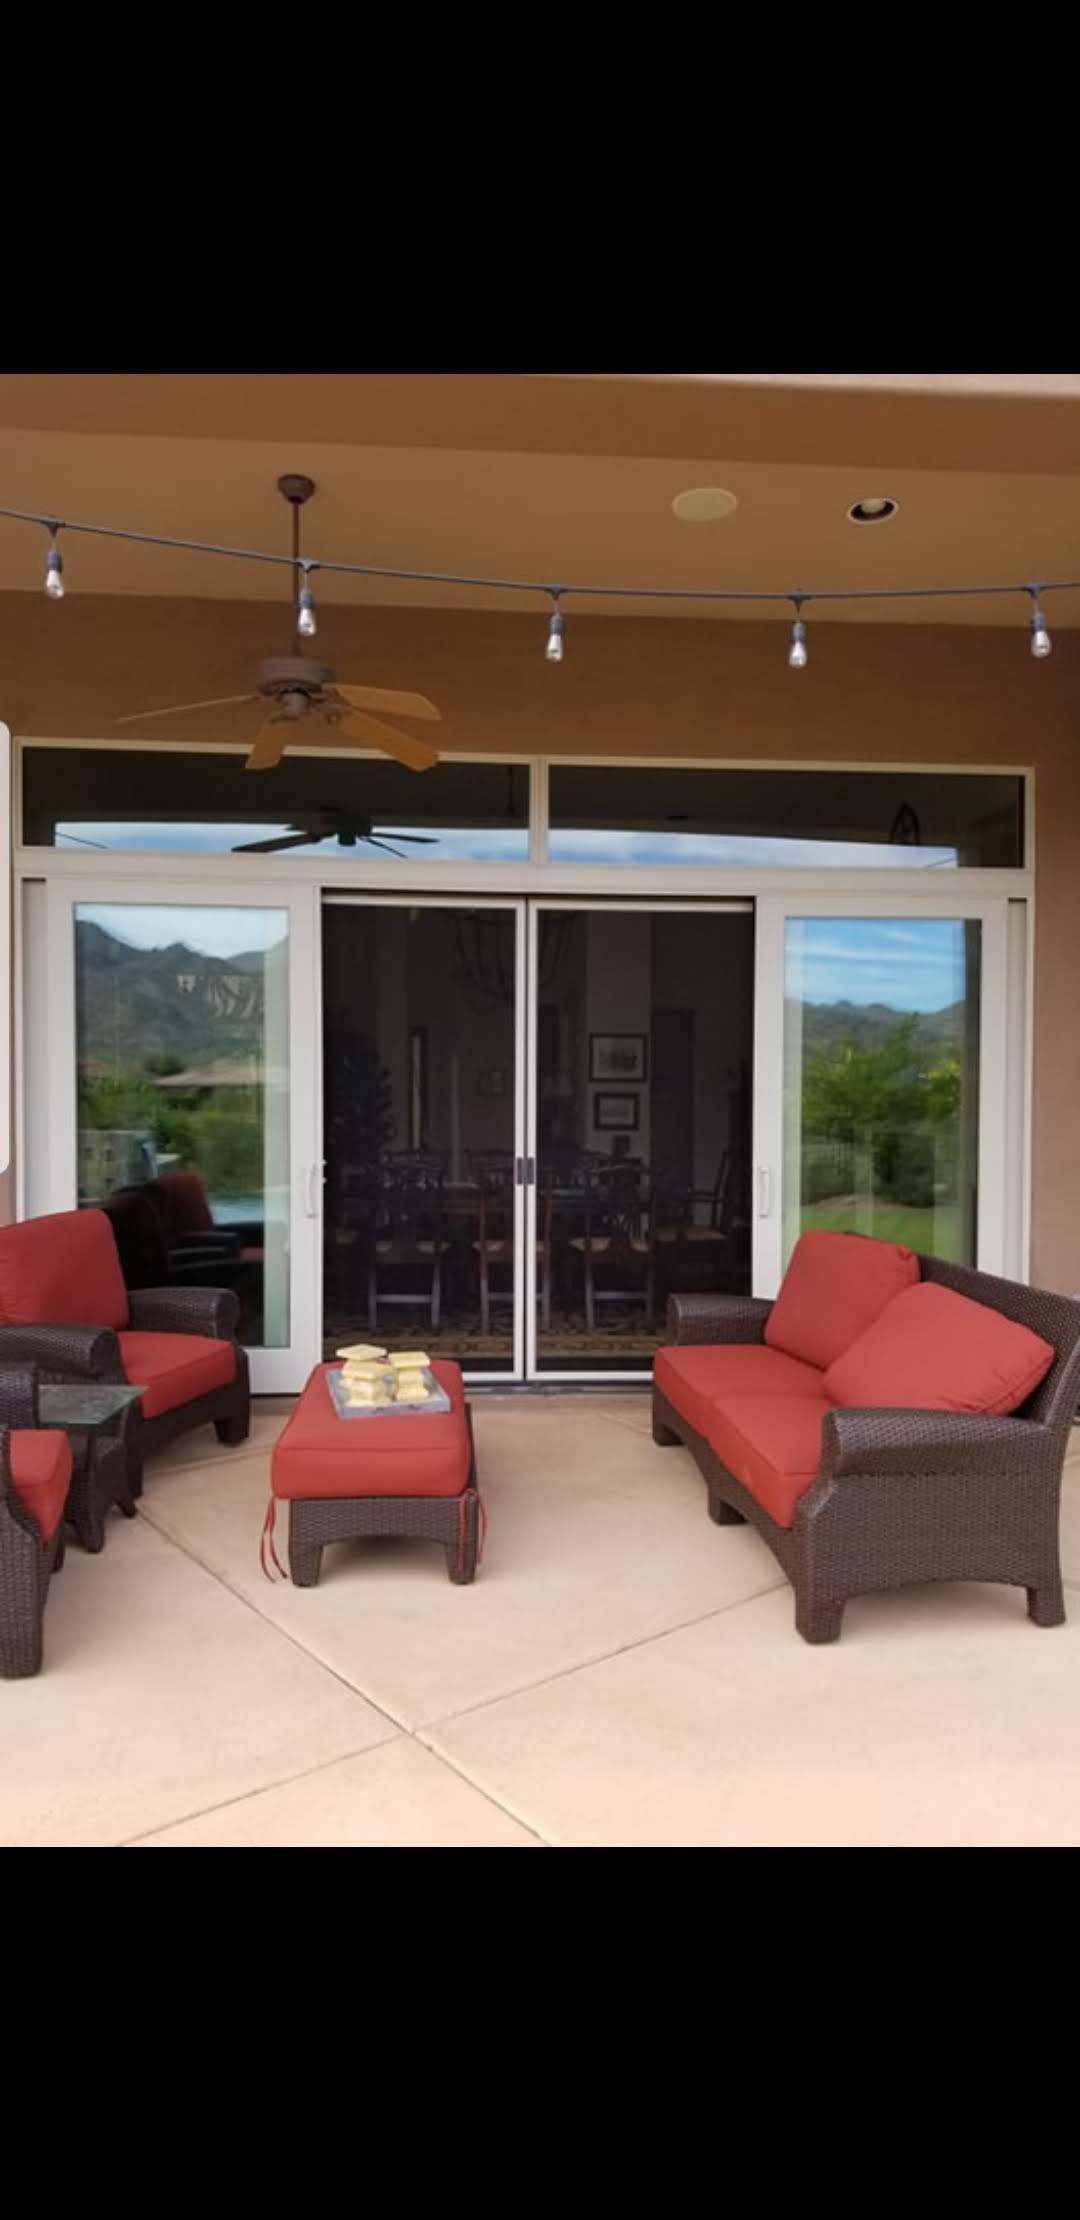 Arizona Window and Door in Scottsdale and Tucson showing sliding patio doors and seating